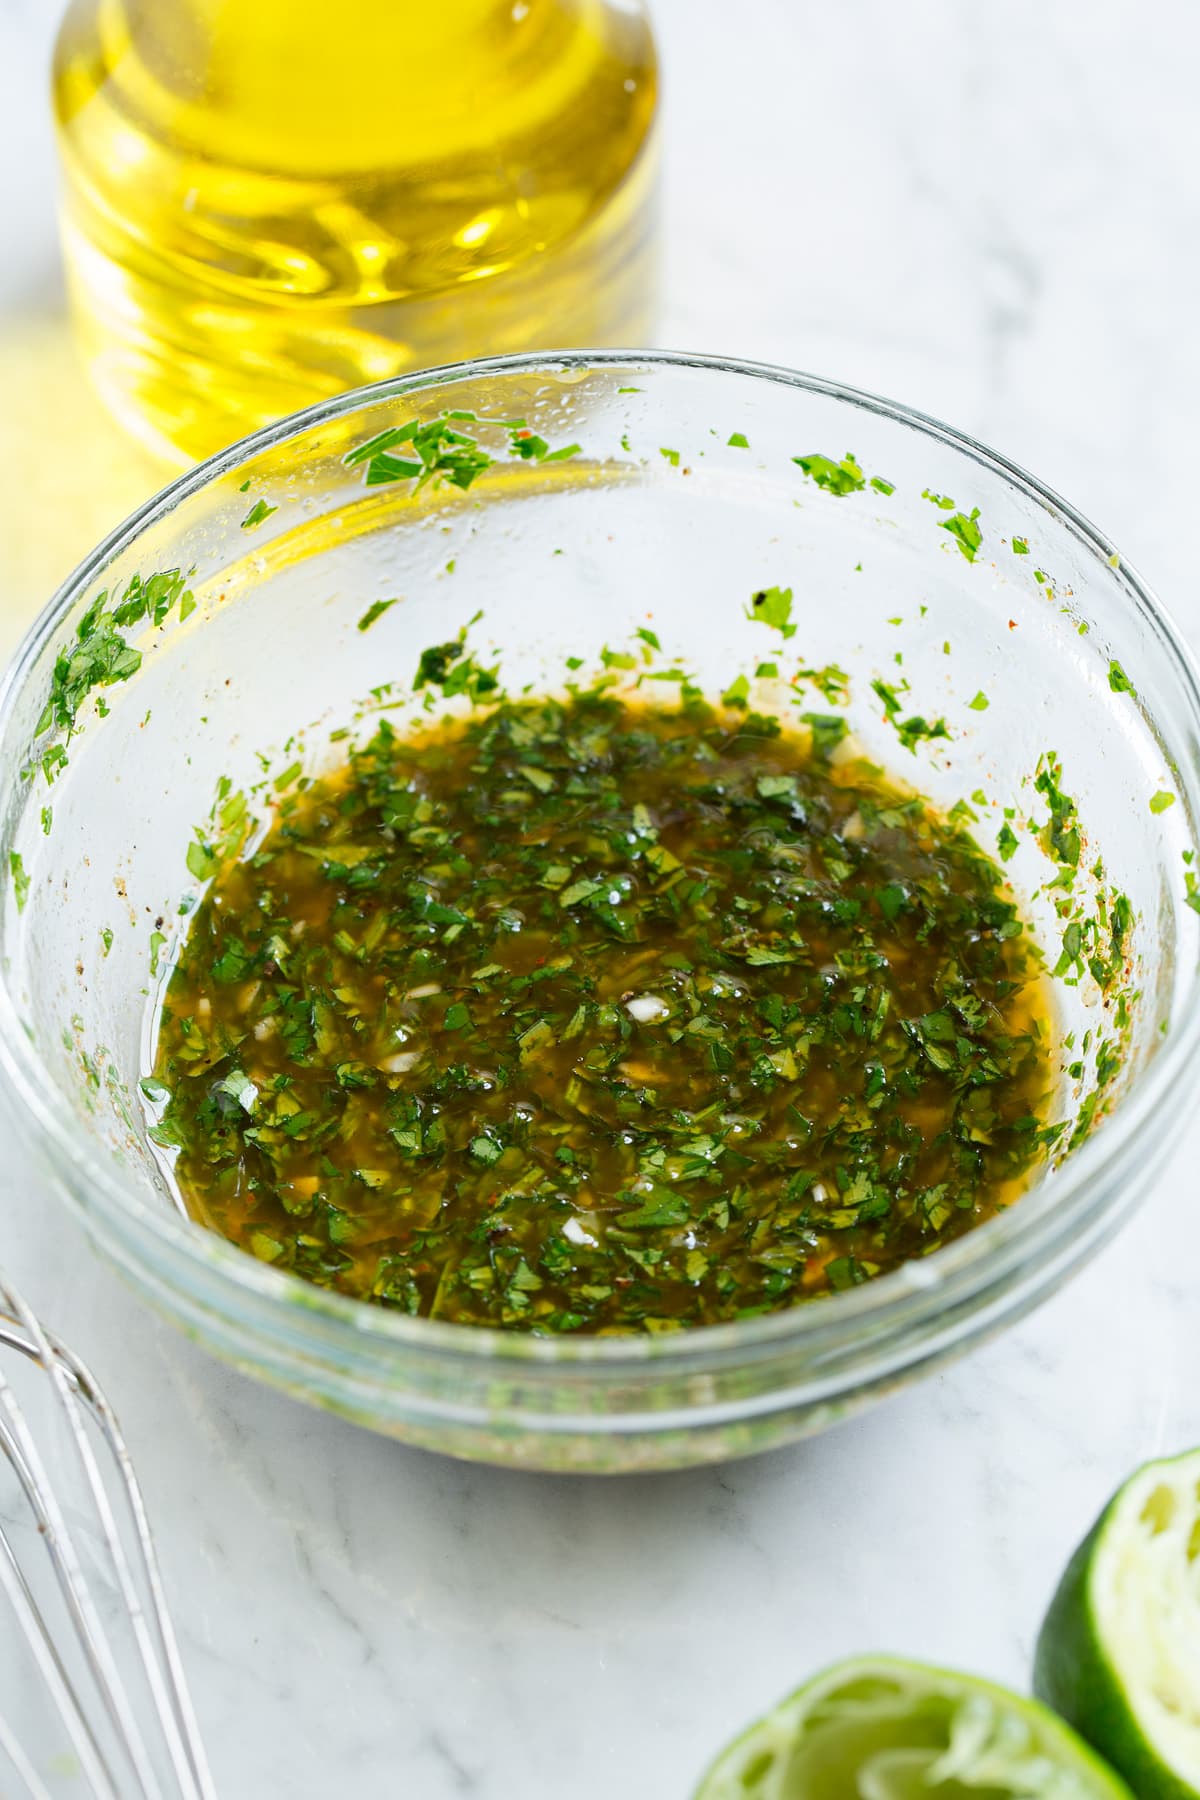 Cilantro Lime Vinaigrette shown in a glass mixing bowl after blending together. This is the dressing used for black bean salad.